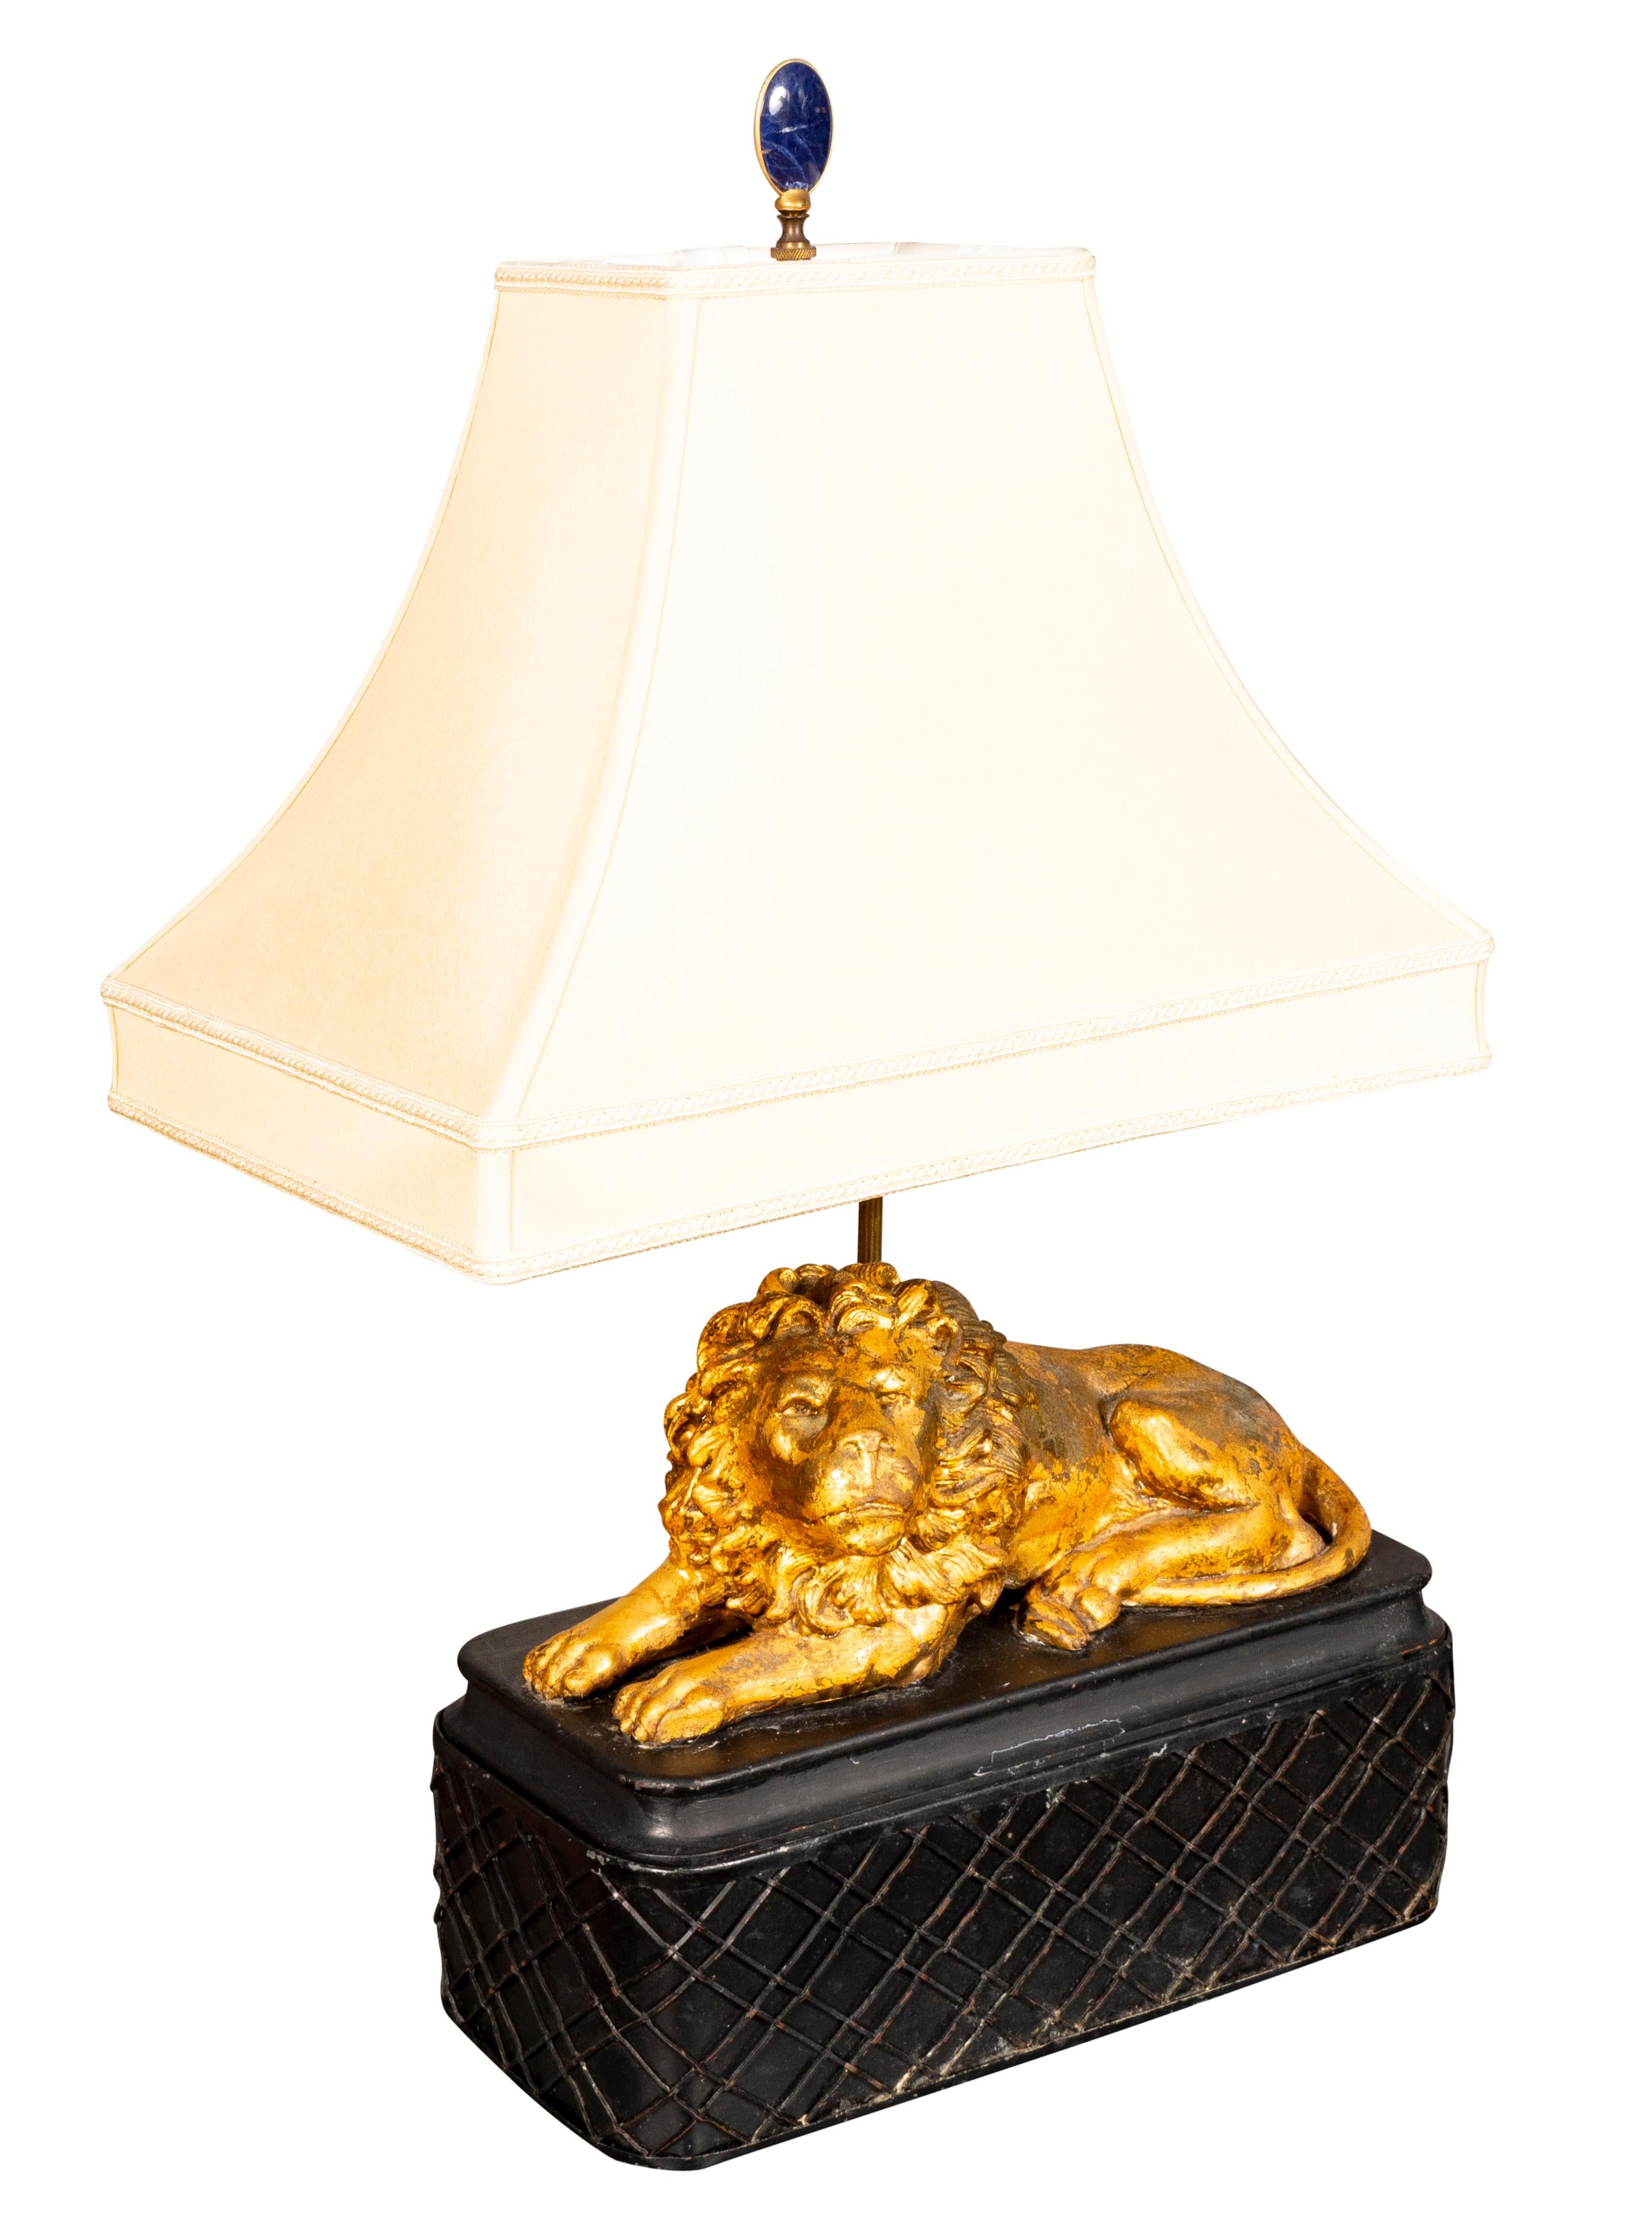 The lions are antique. Each seated on a rectangular ebonized base. With shades. Two light socket. The lions are early with lots of touchups to the gilding. They are carved wood and gesso and later with touchups. Lapis finials.